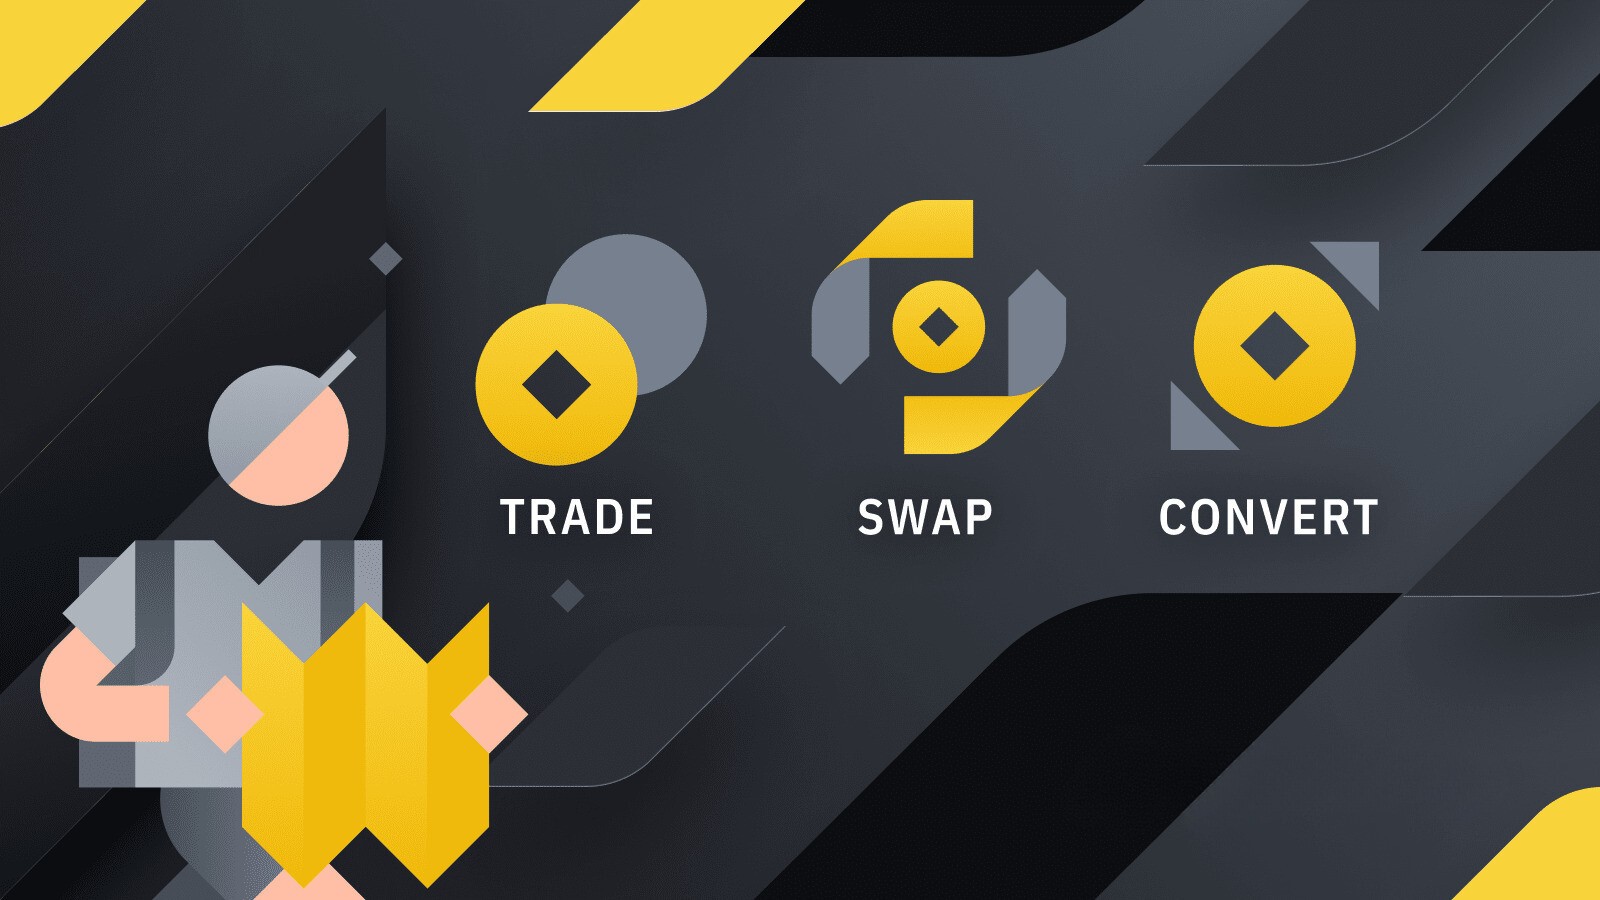 What Is Swap In Cryptocurrency